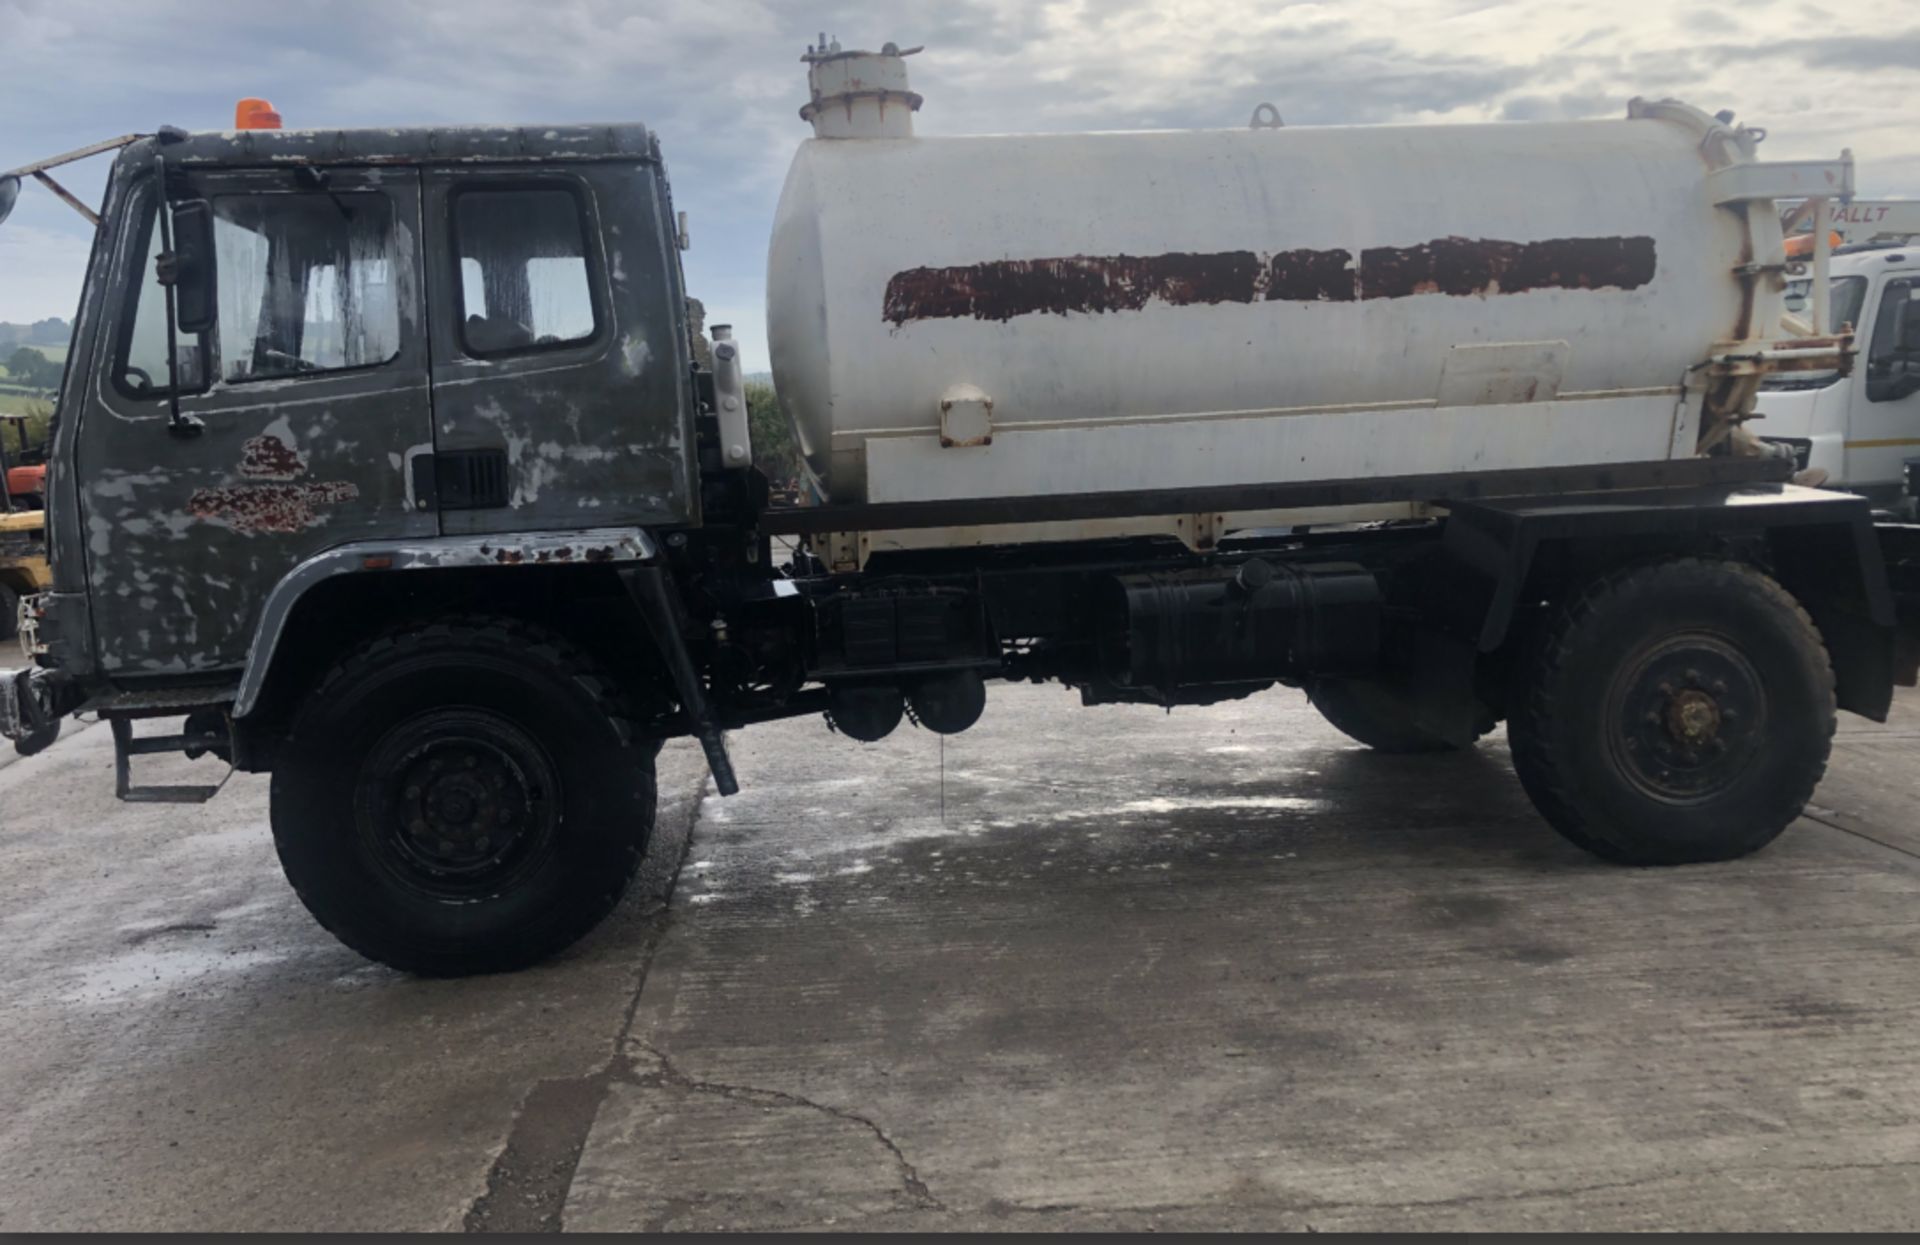 DAF T45 ,4×4 WATER BOWSER TRUCK - Image 4 of 10